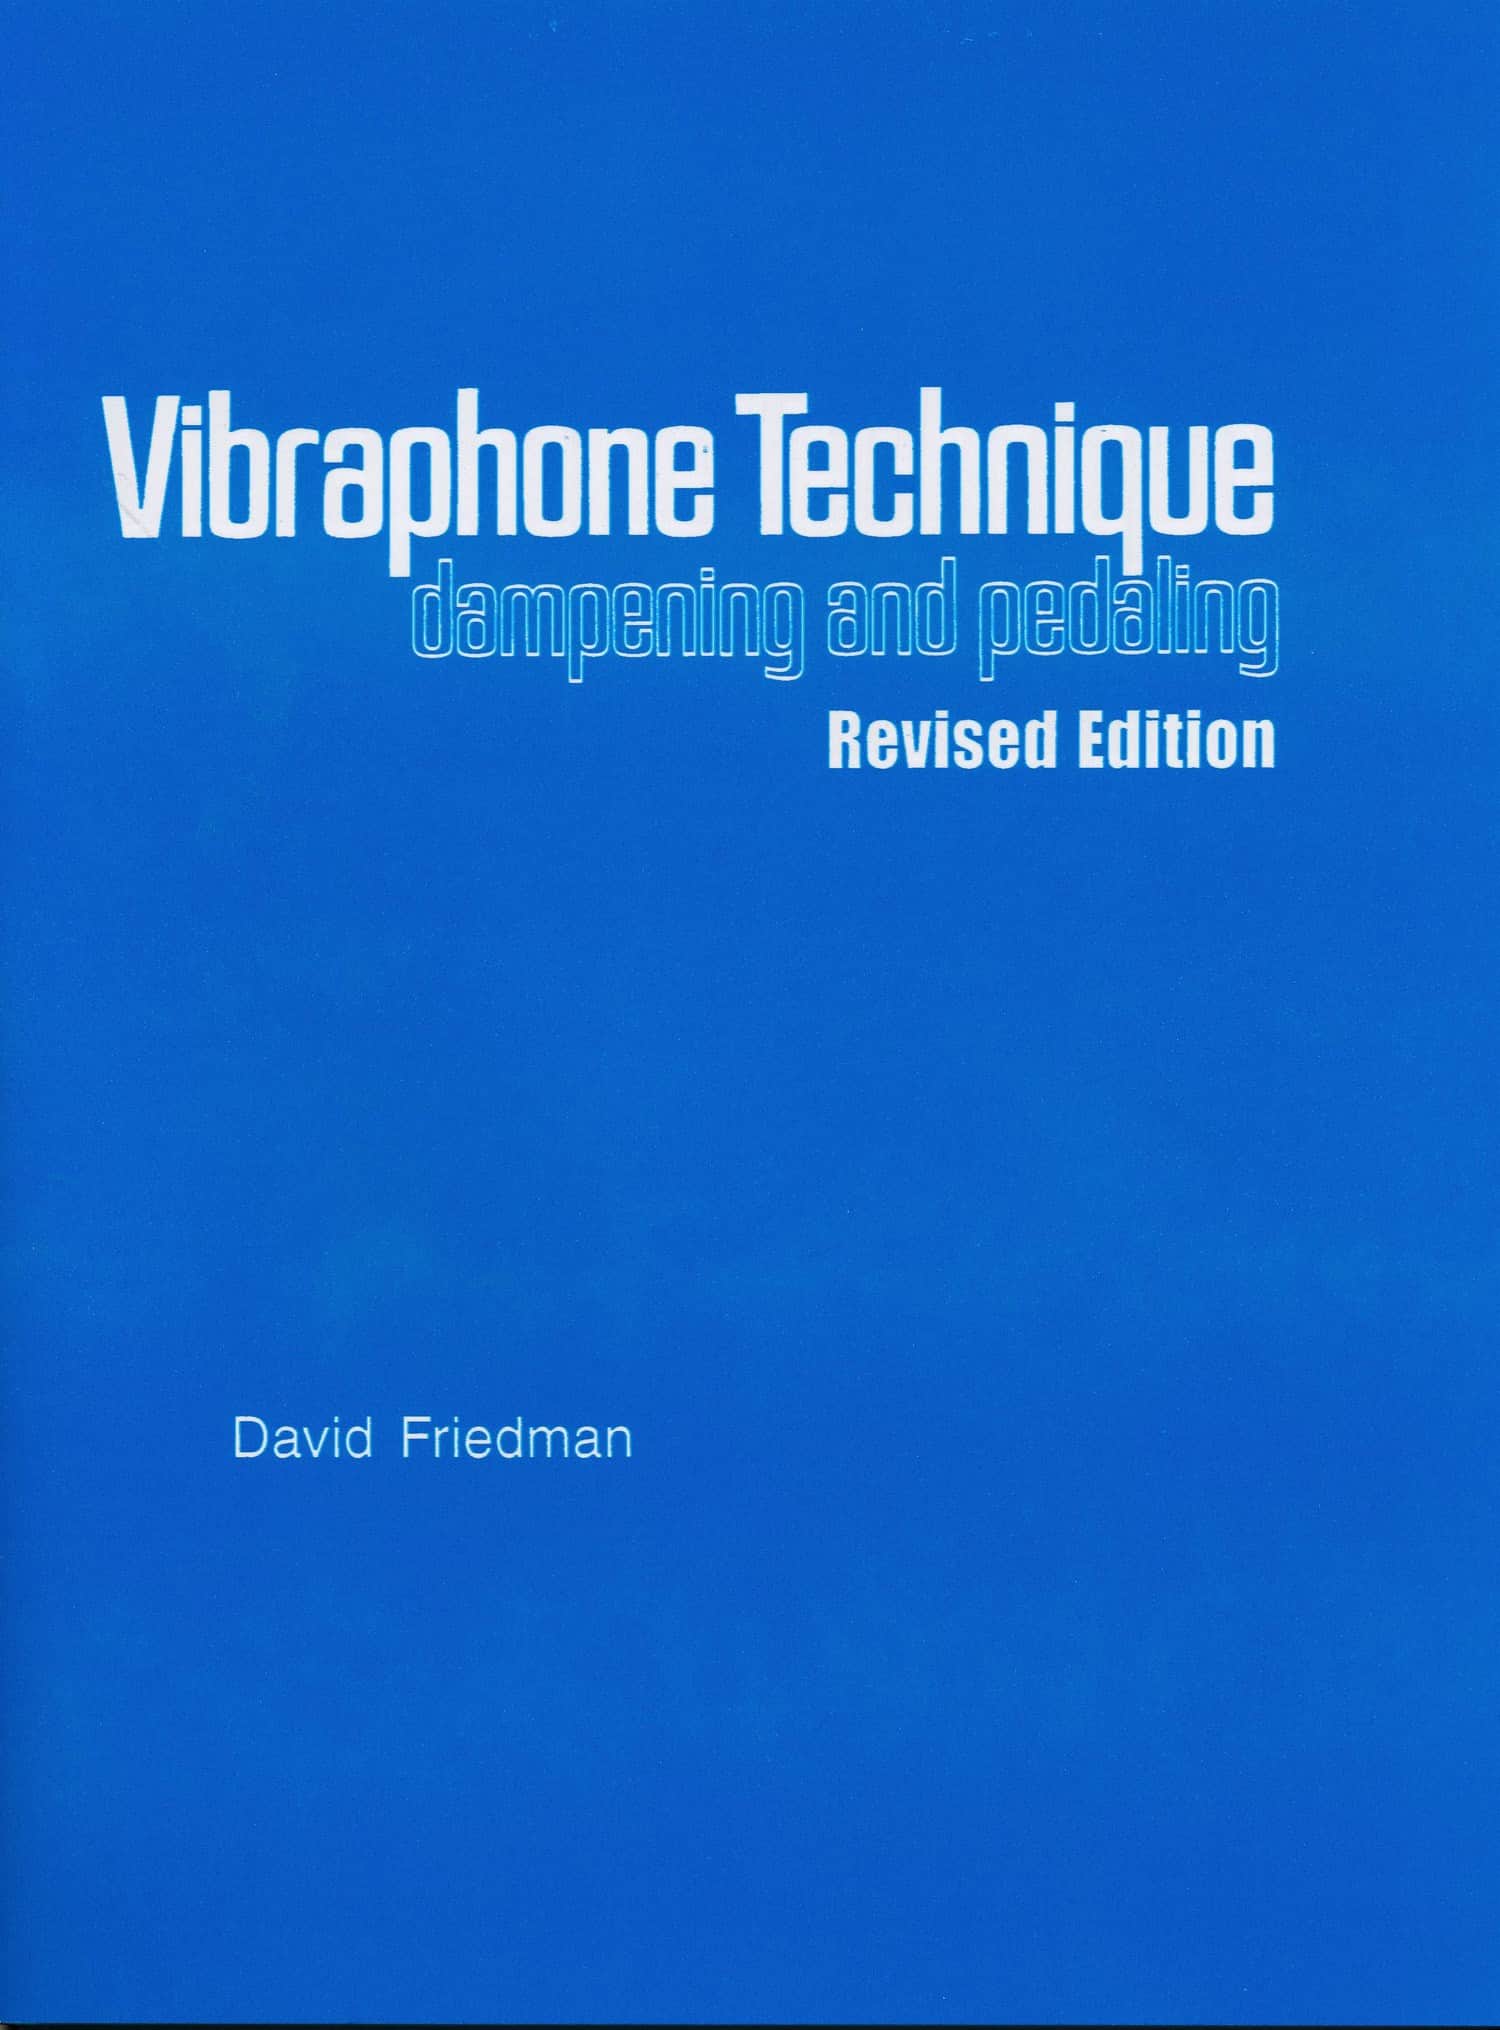 Vibraphone Technique - Dampening And Pedaling by David Friedman